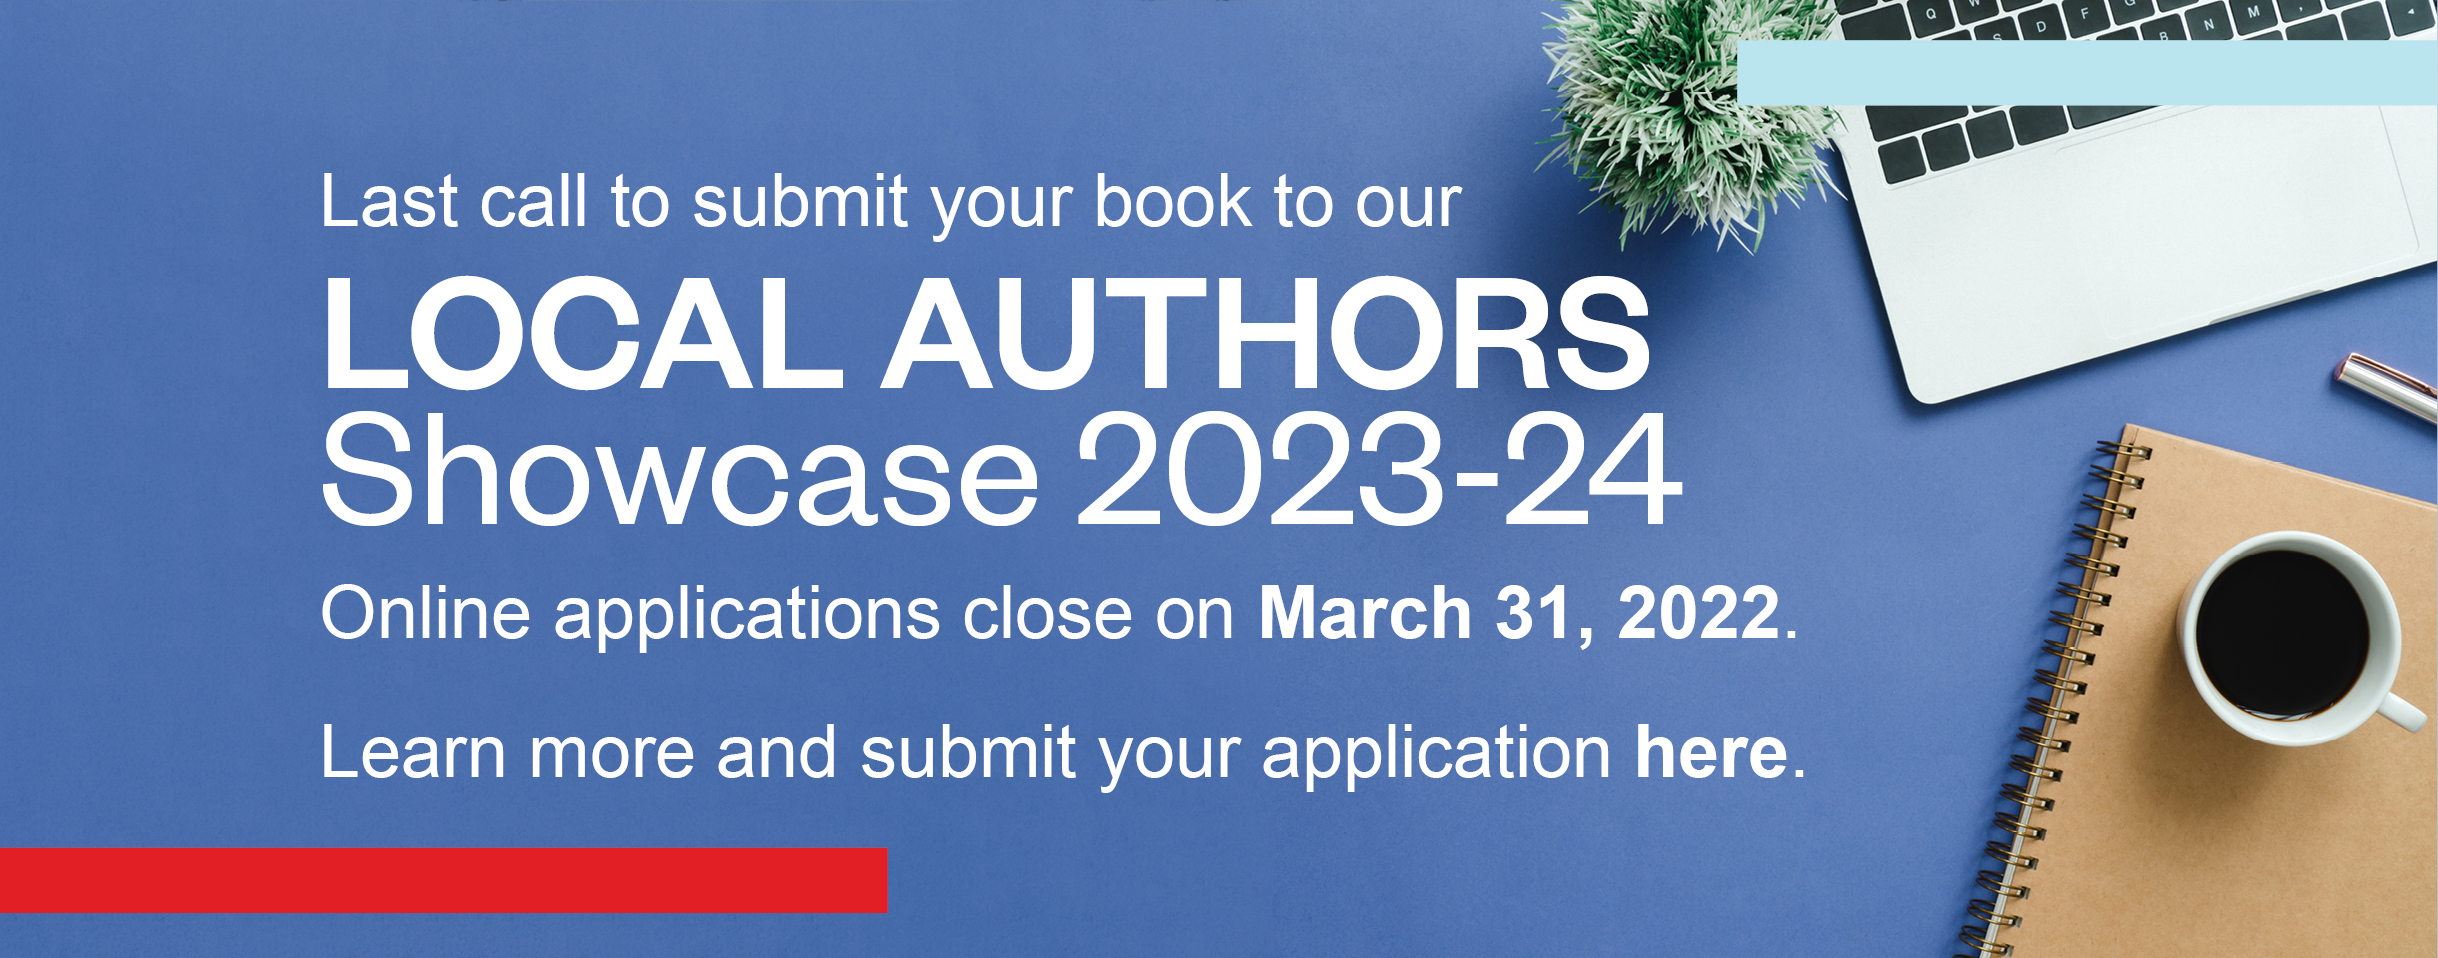 A laptop, plant, brown notebook, pen and a cup of coffee lay on a blue surface on the right side of the graphic. Text reads: Last call to submit your book to our Local Authors Showcase 2023-24. Online applications close on March 31, 2022. Learn more and submit your application here.